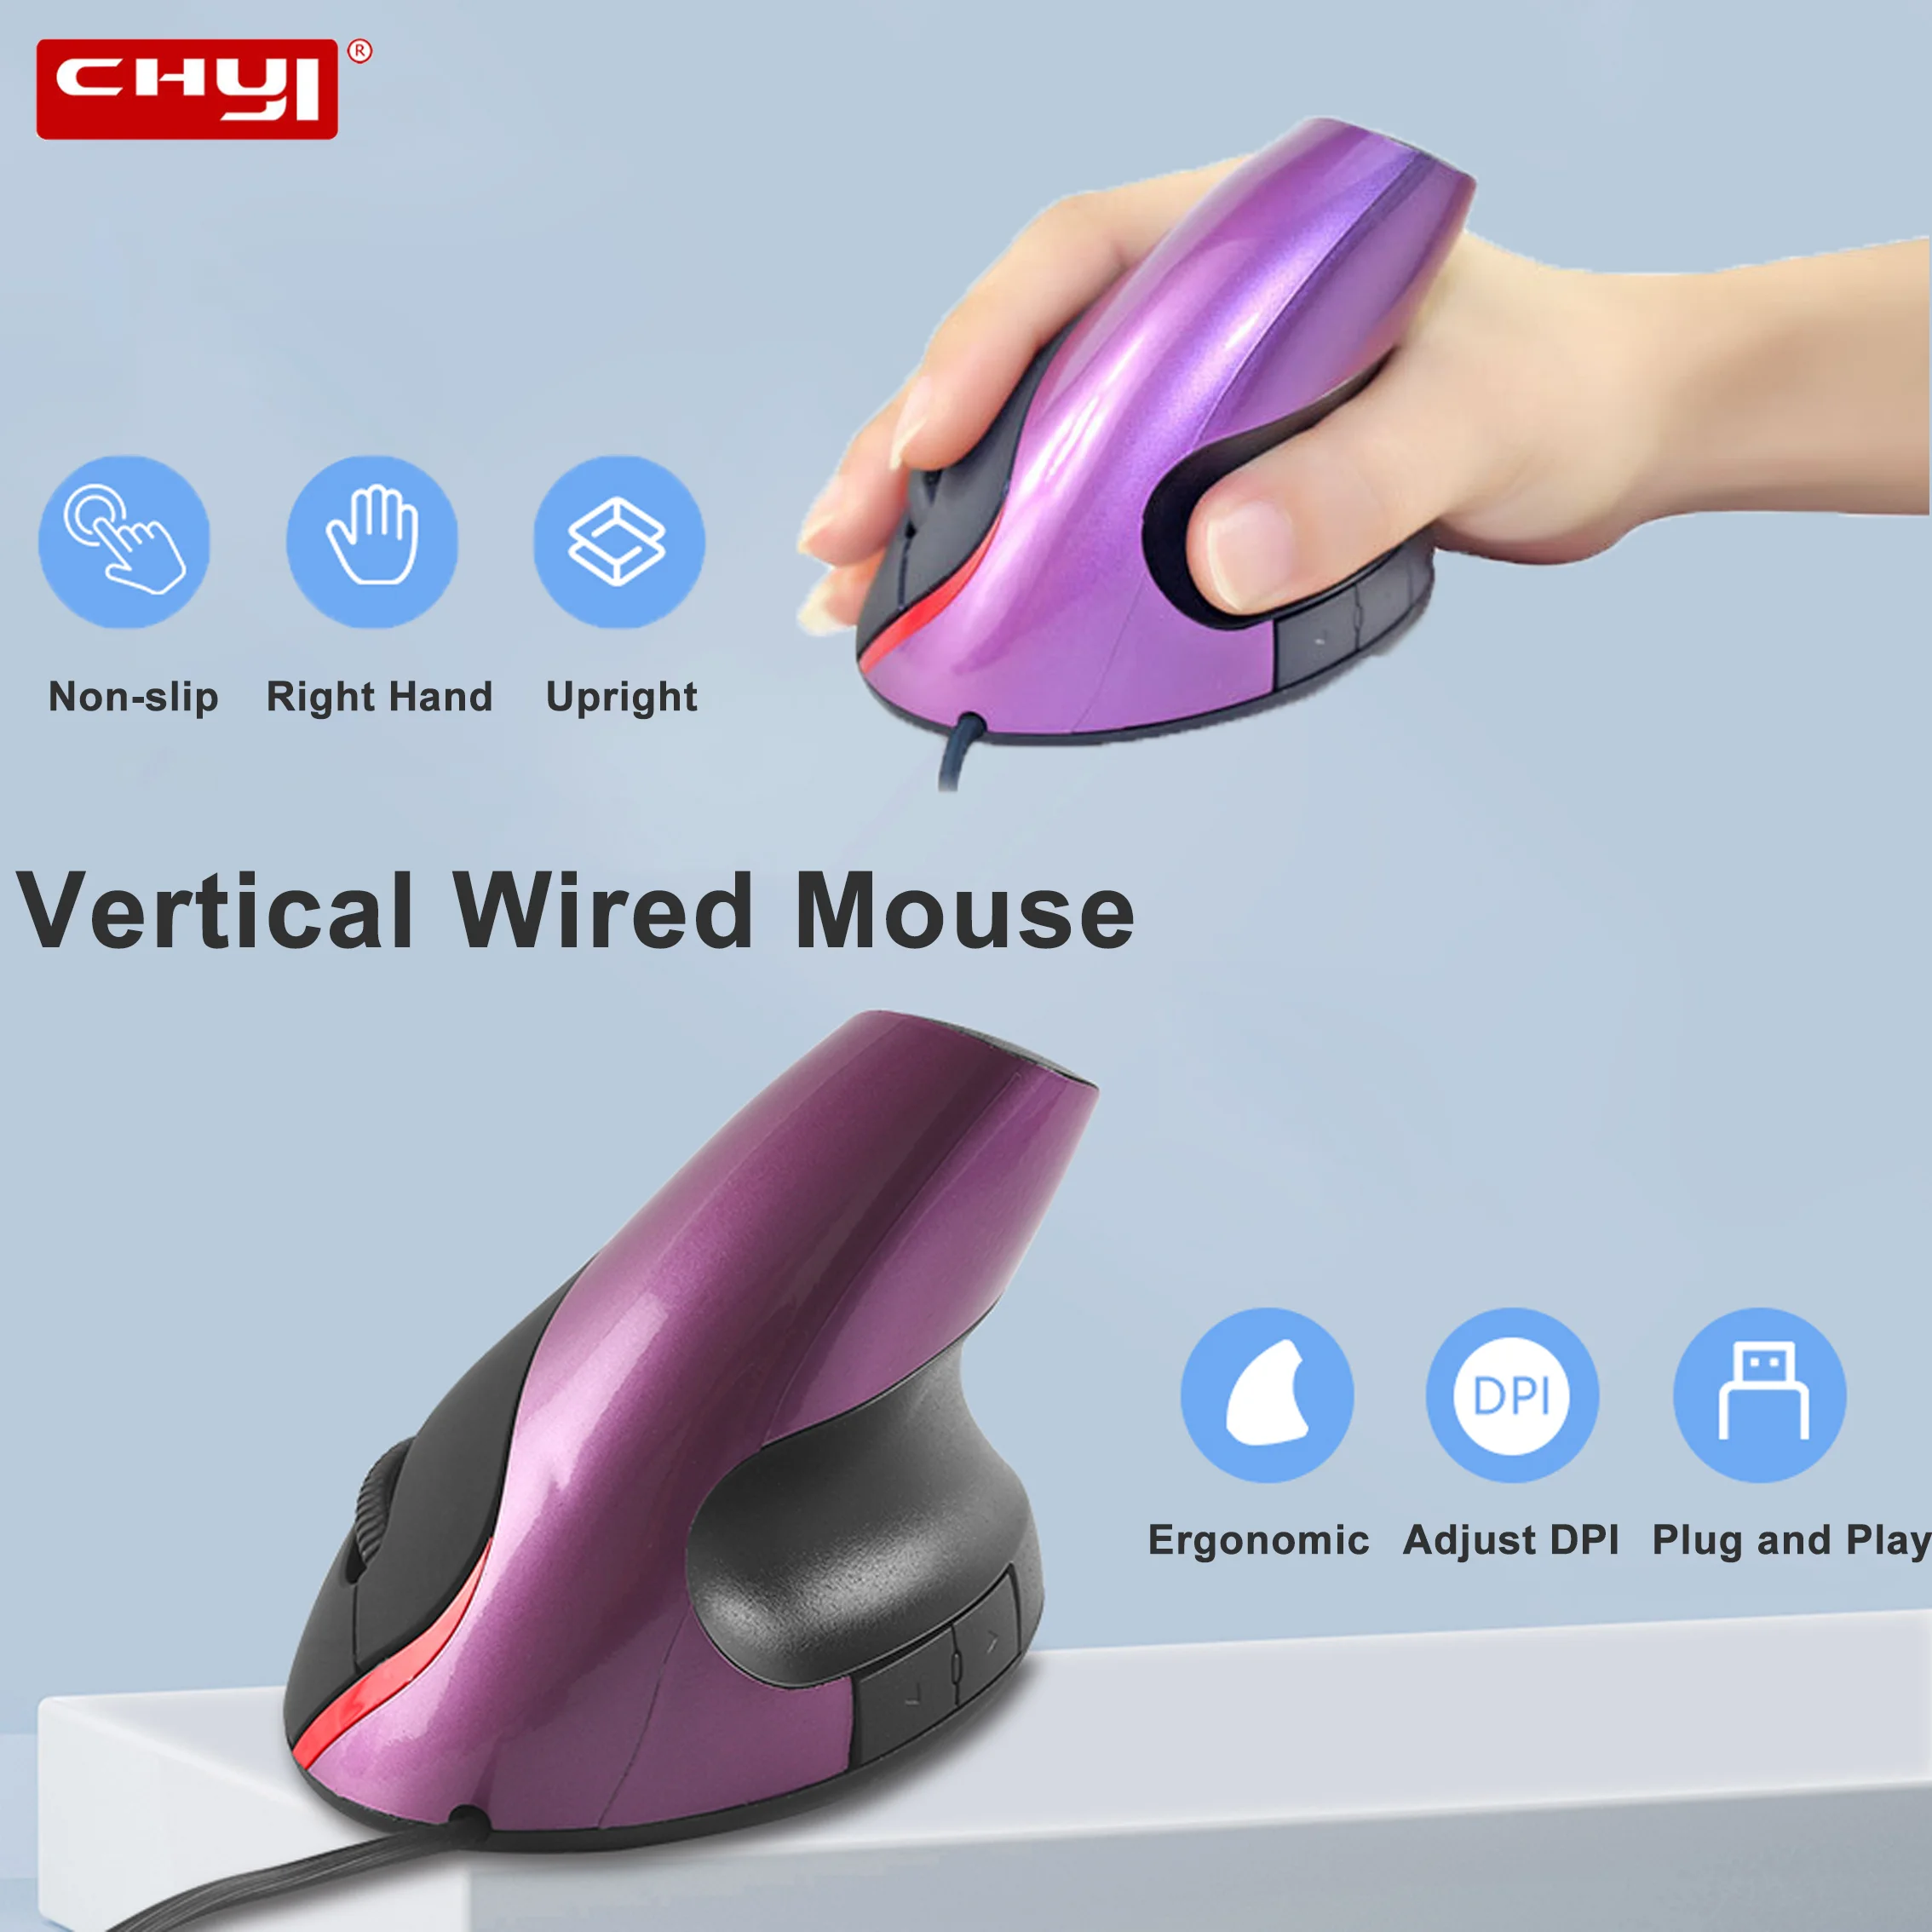 

CHYI Ergonomic Vertical Mouse Optical 1600DPI Healthy Upright Gaming Mice 5D USB Wired Computer Mouse Mause For Laptop PC Gamer